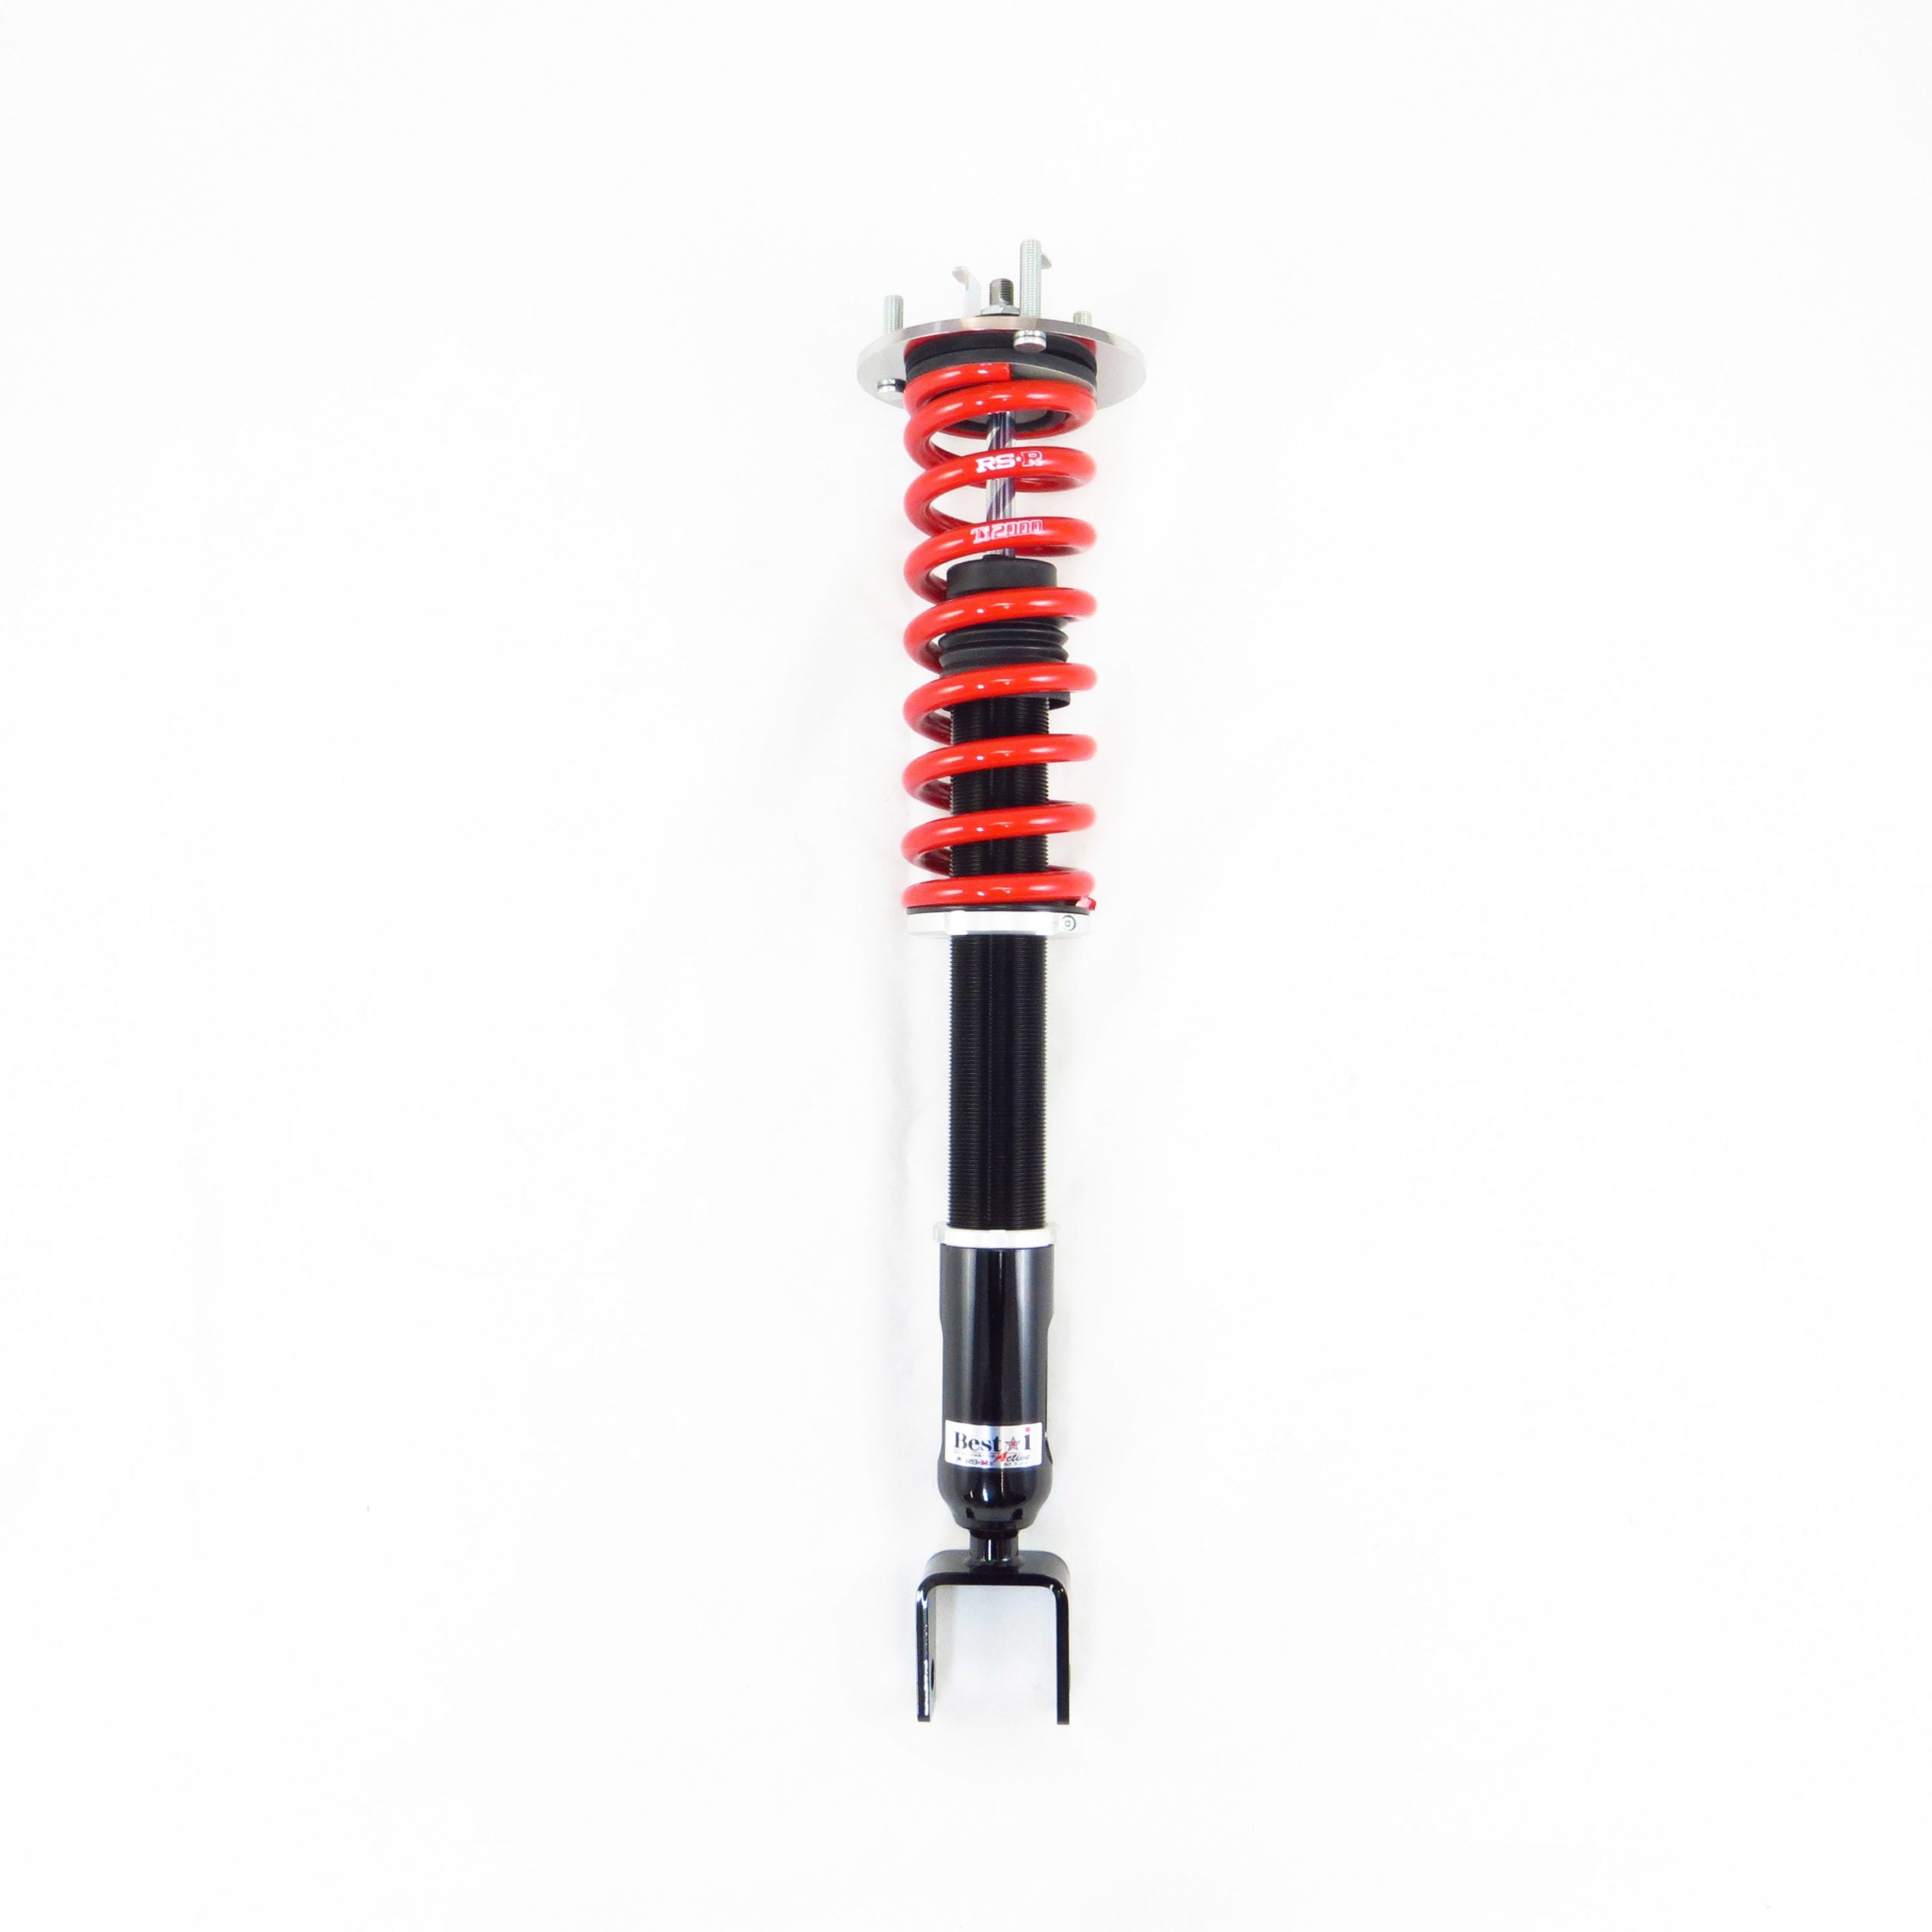 RS-R BEST-I ACTIVE COILOVER KIT: 2021 LEXUS IS 350 F SPORT